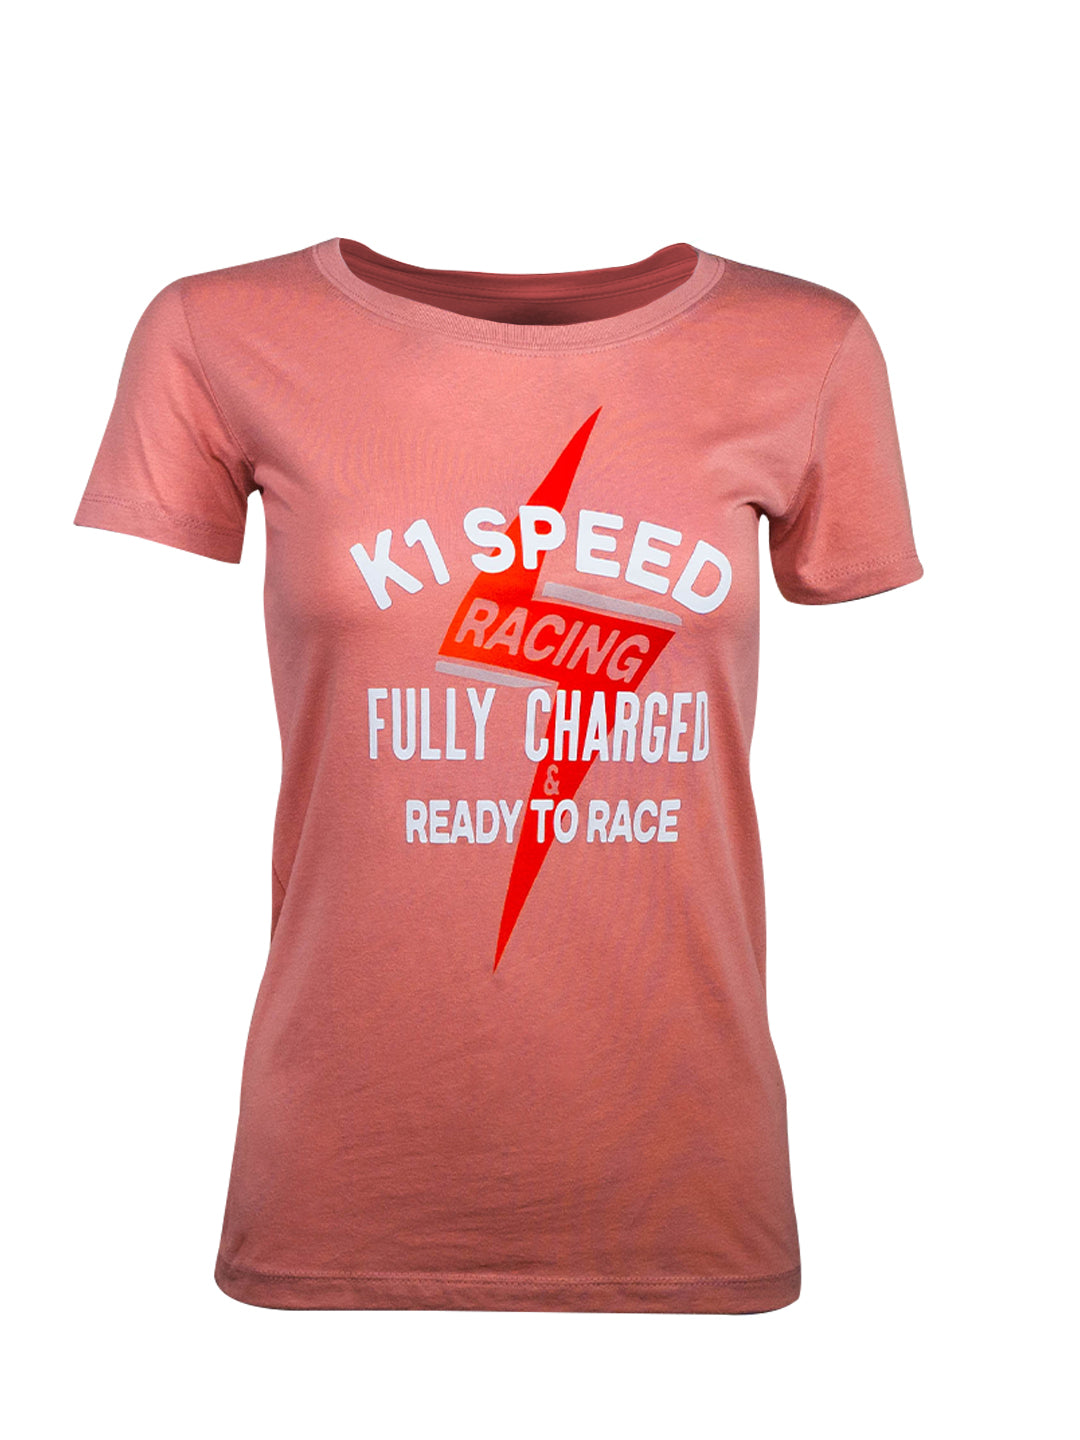 Fully Charged Womens Tee